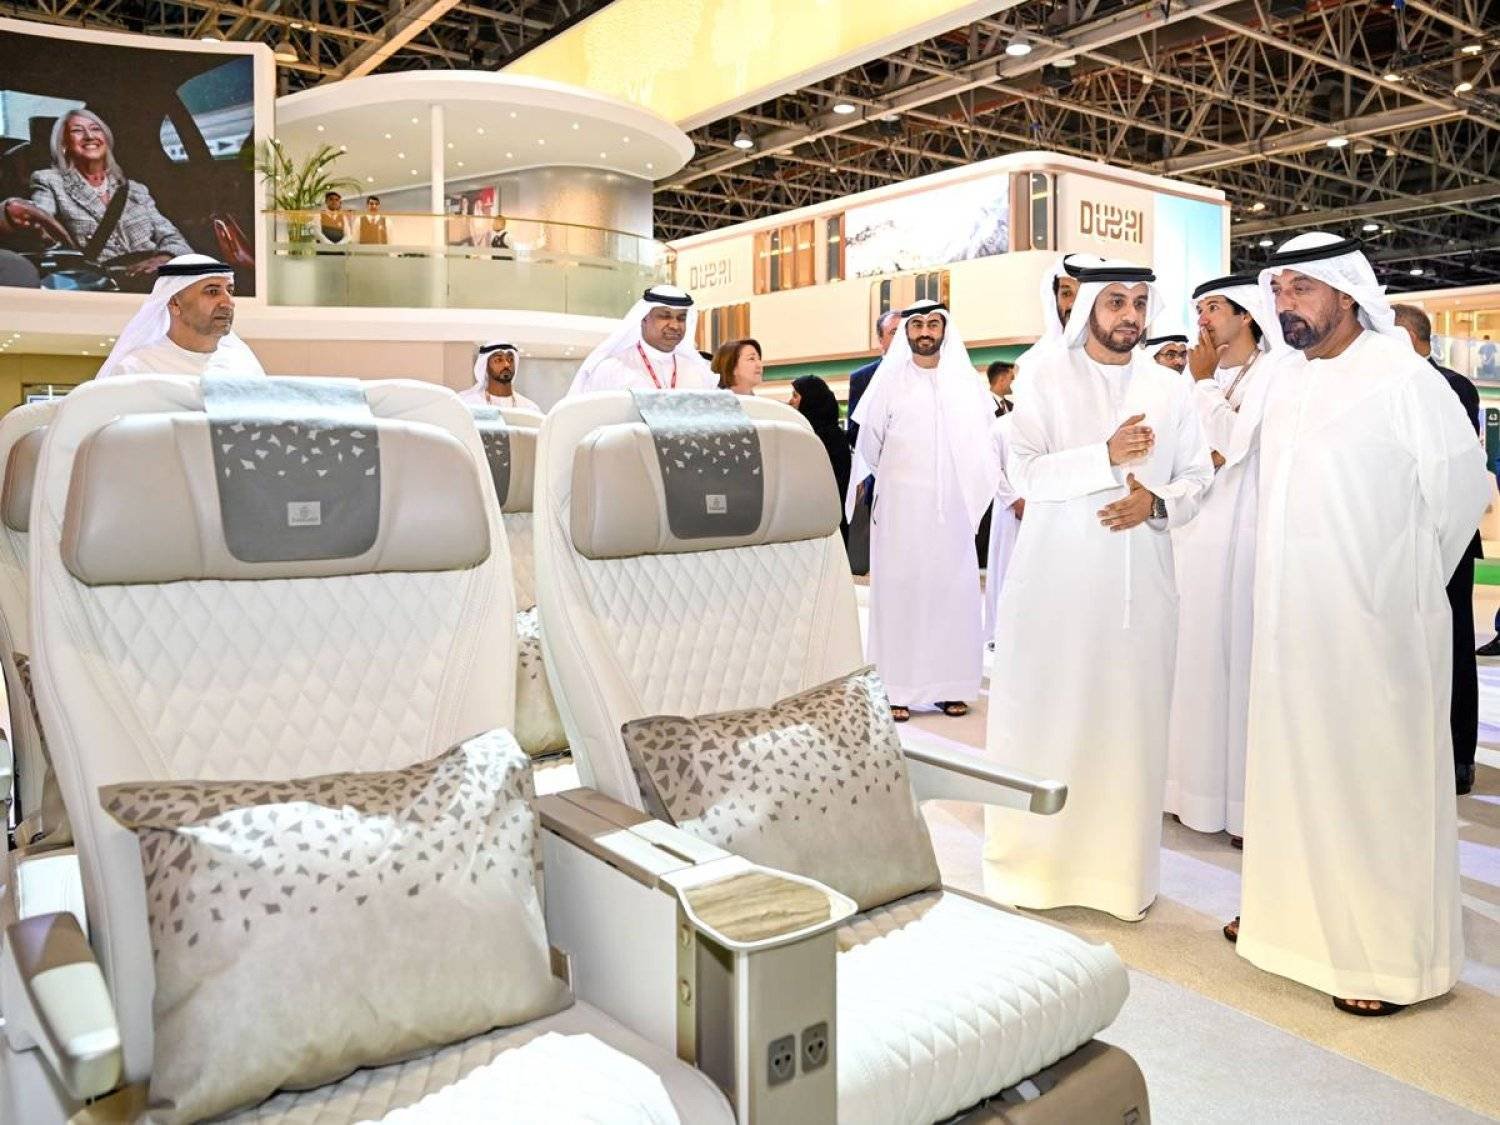 President of Dubai Airports, Supreme President and CEO of Emirates Airlines Sheikh Ahmed bin Saeed Al Maktoum during his tour of the company’s pavilion at the Arabian Travel Market in Dubai. (Asharq Al-Awsat) 